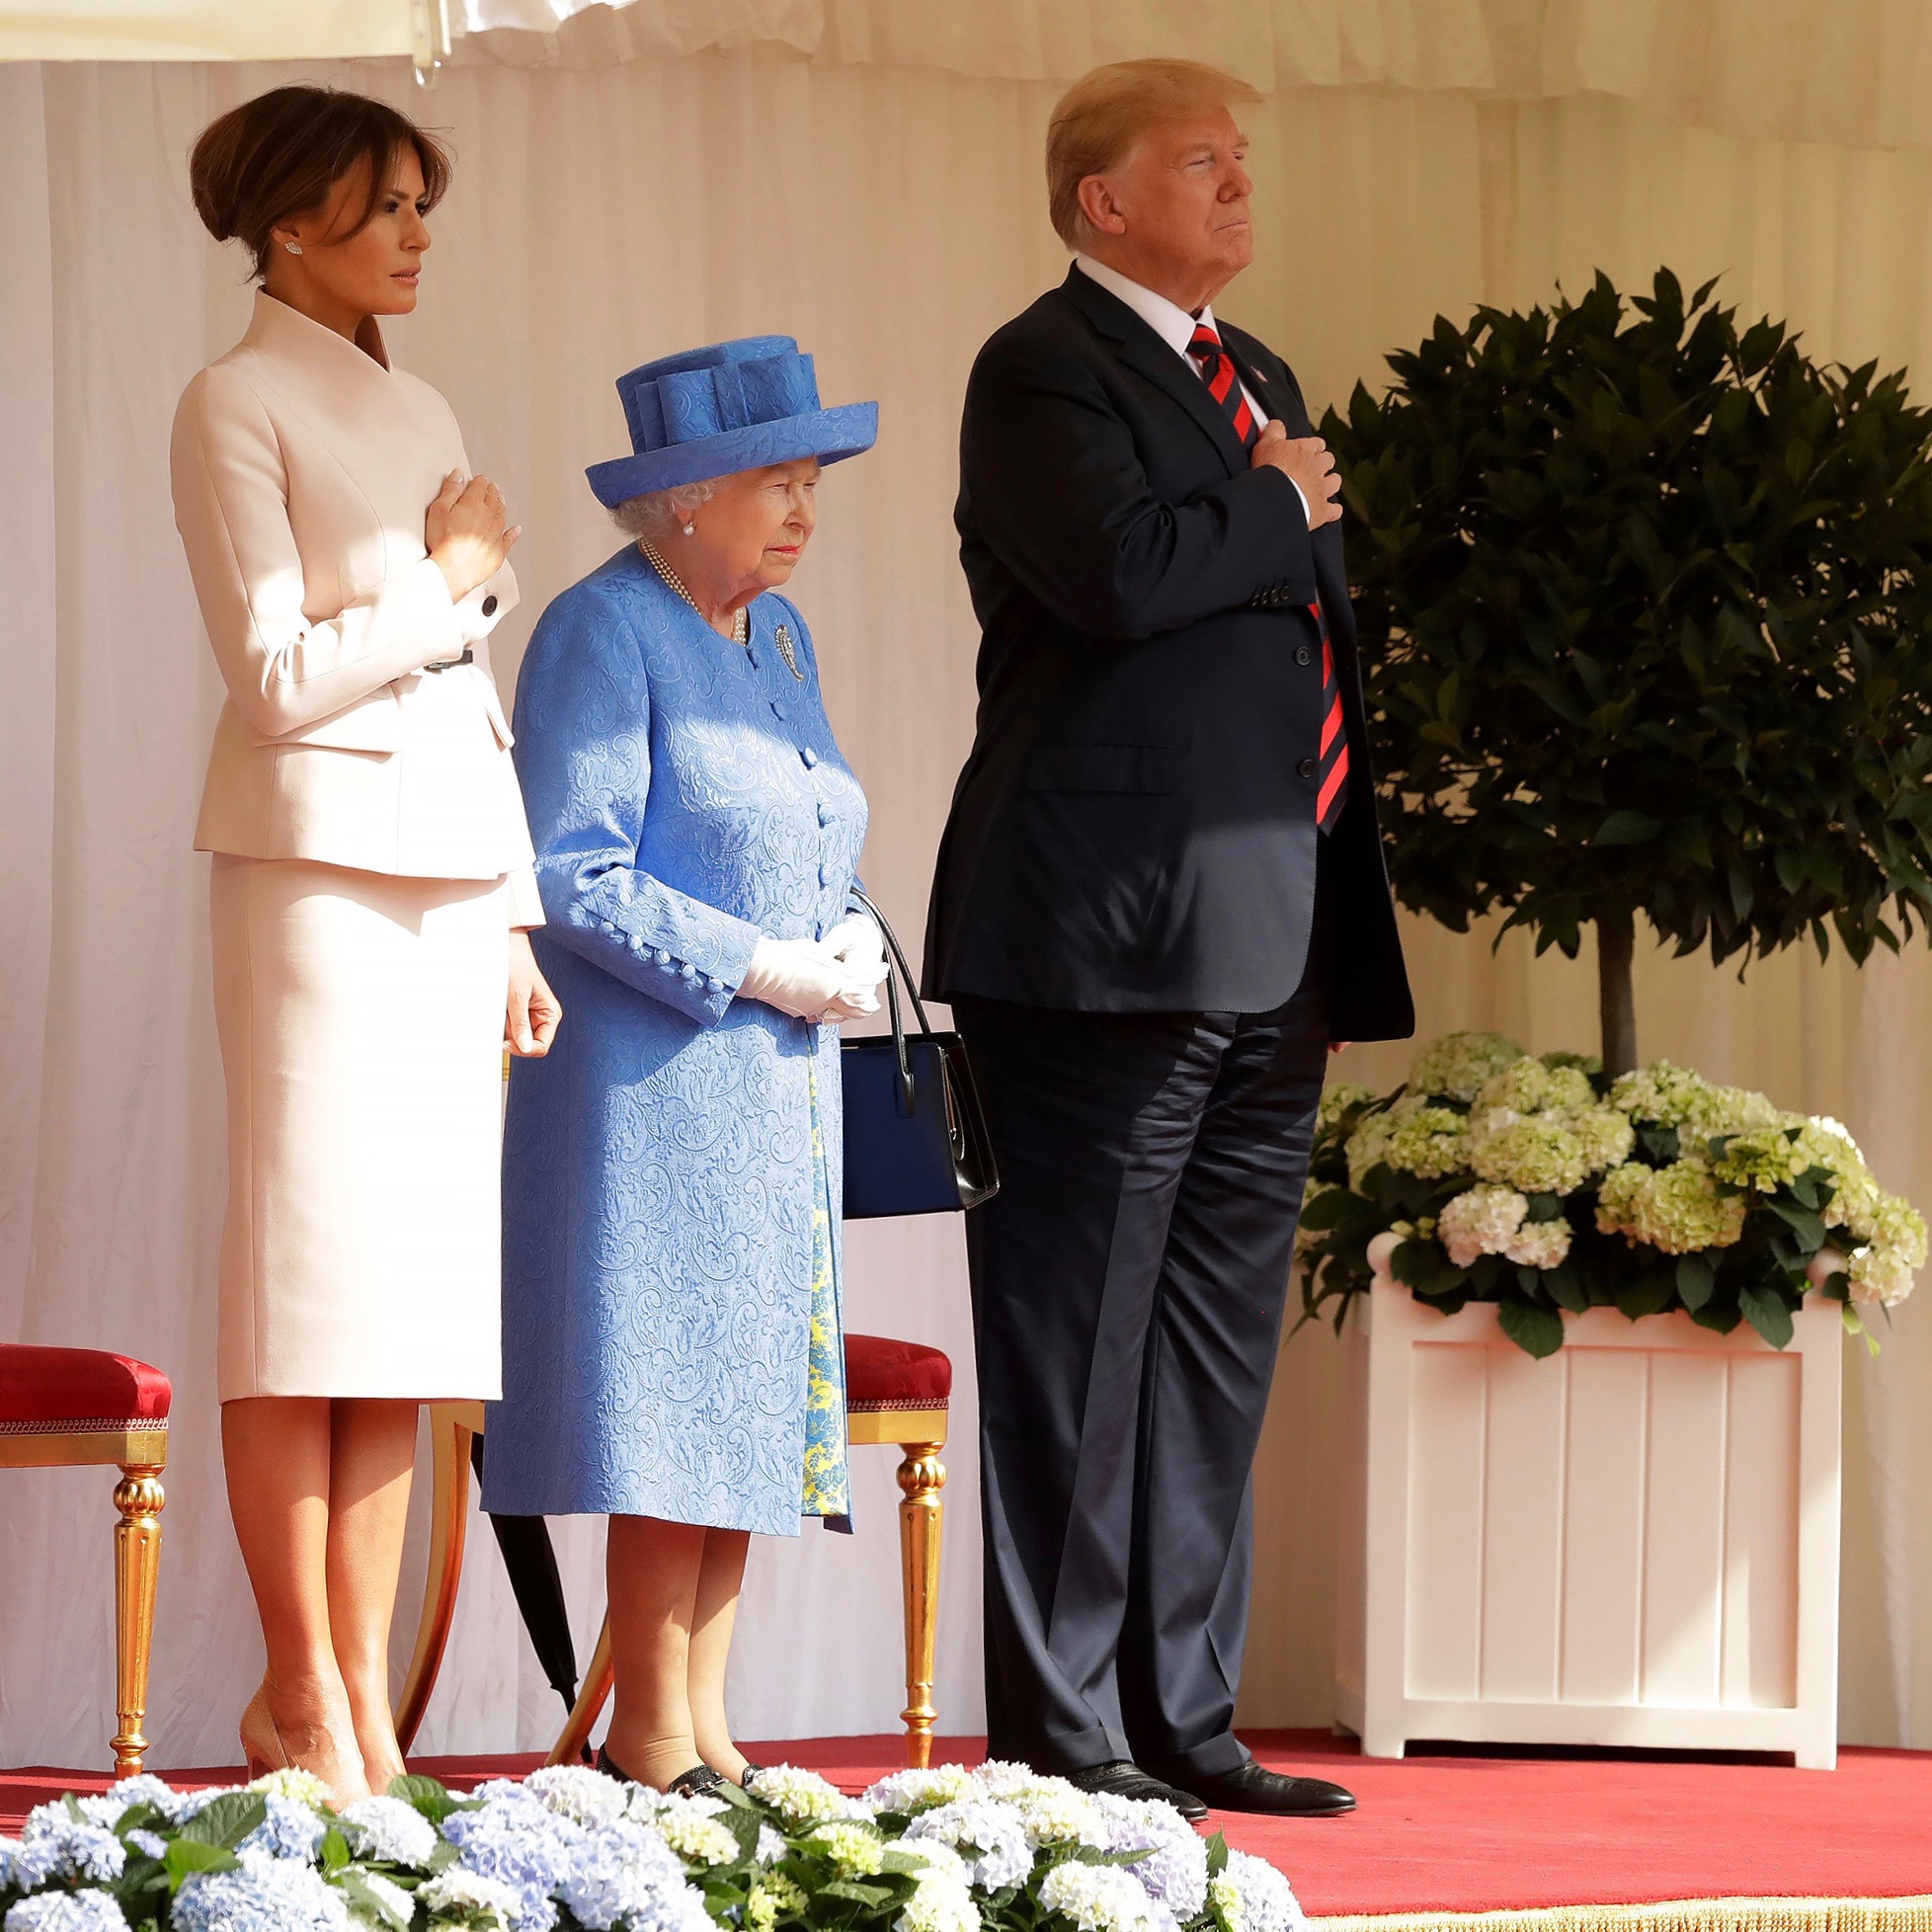 Queen Elizabeth Meets President And Mrs Trump For Tea At Windsor Castle [VIDEO]